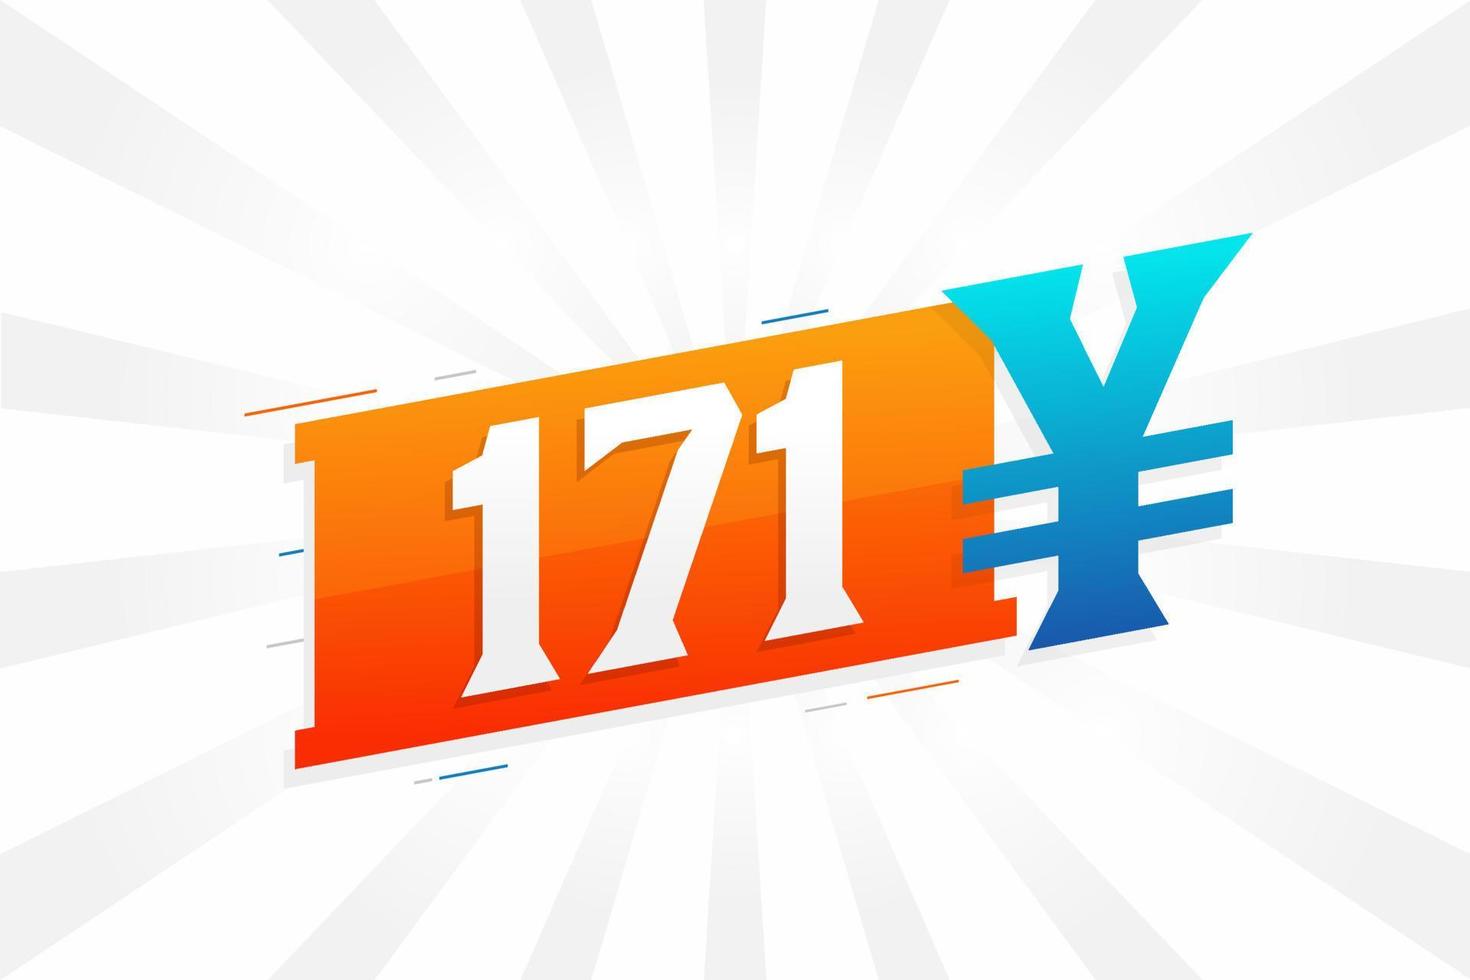 171 Yuan Chinese currency vector text symbol. 171 Yen Japanese currency Money stock vector